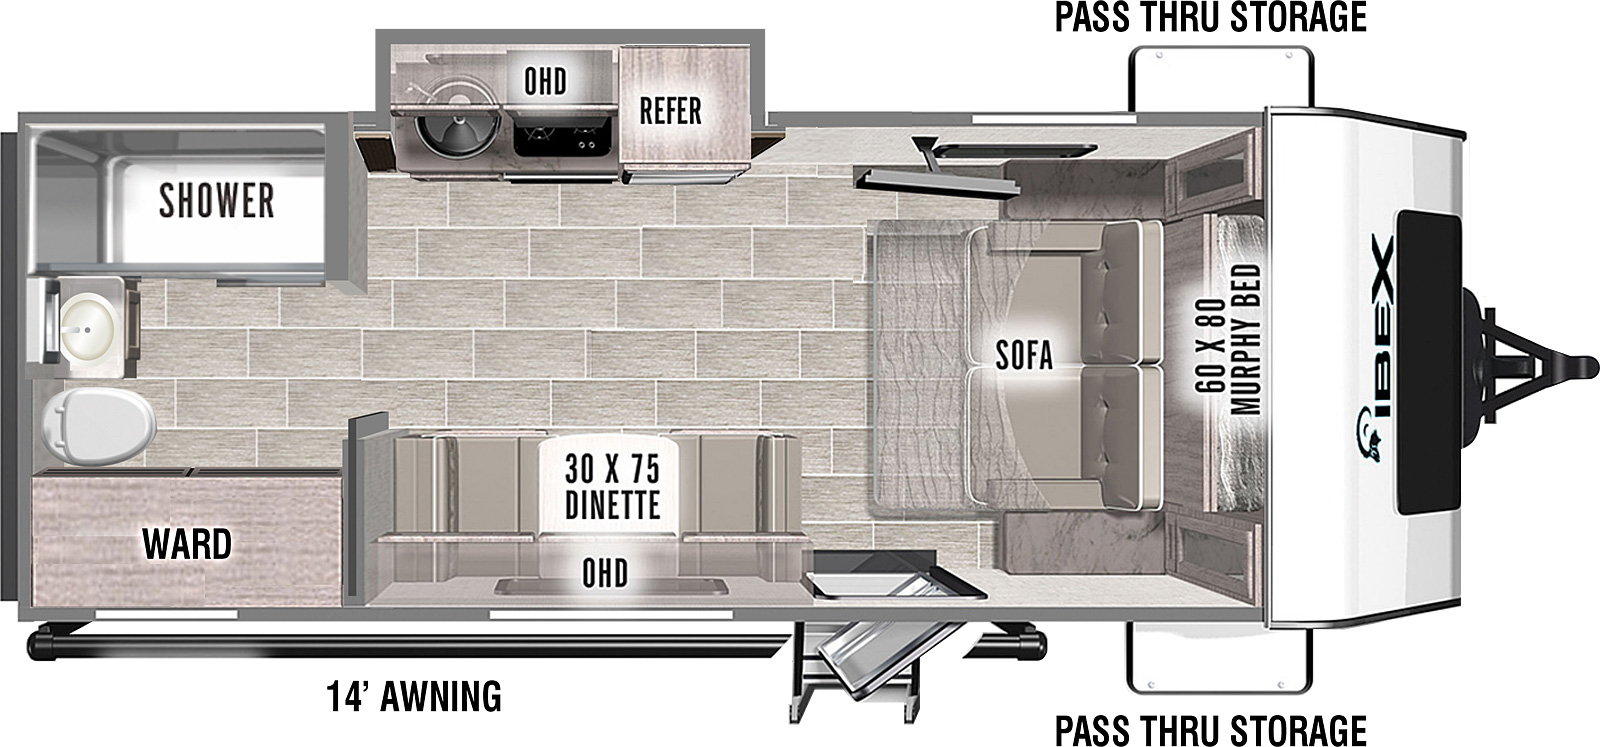 Floorplan image shows a 21 foot, 11 inch long travel trailer with front murphy-type bed and sofa, 30 by 75-inch dinette, kitchen area situated in slideout with cooktop, refrigerator, and sink. Rear bathroom with shower and ward. The exterior features a 14 foot awning and pass thru storage near the front of the trailer. 